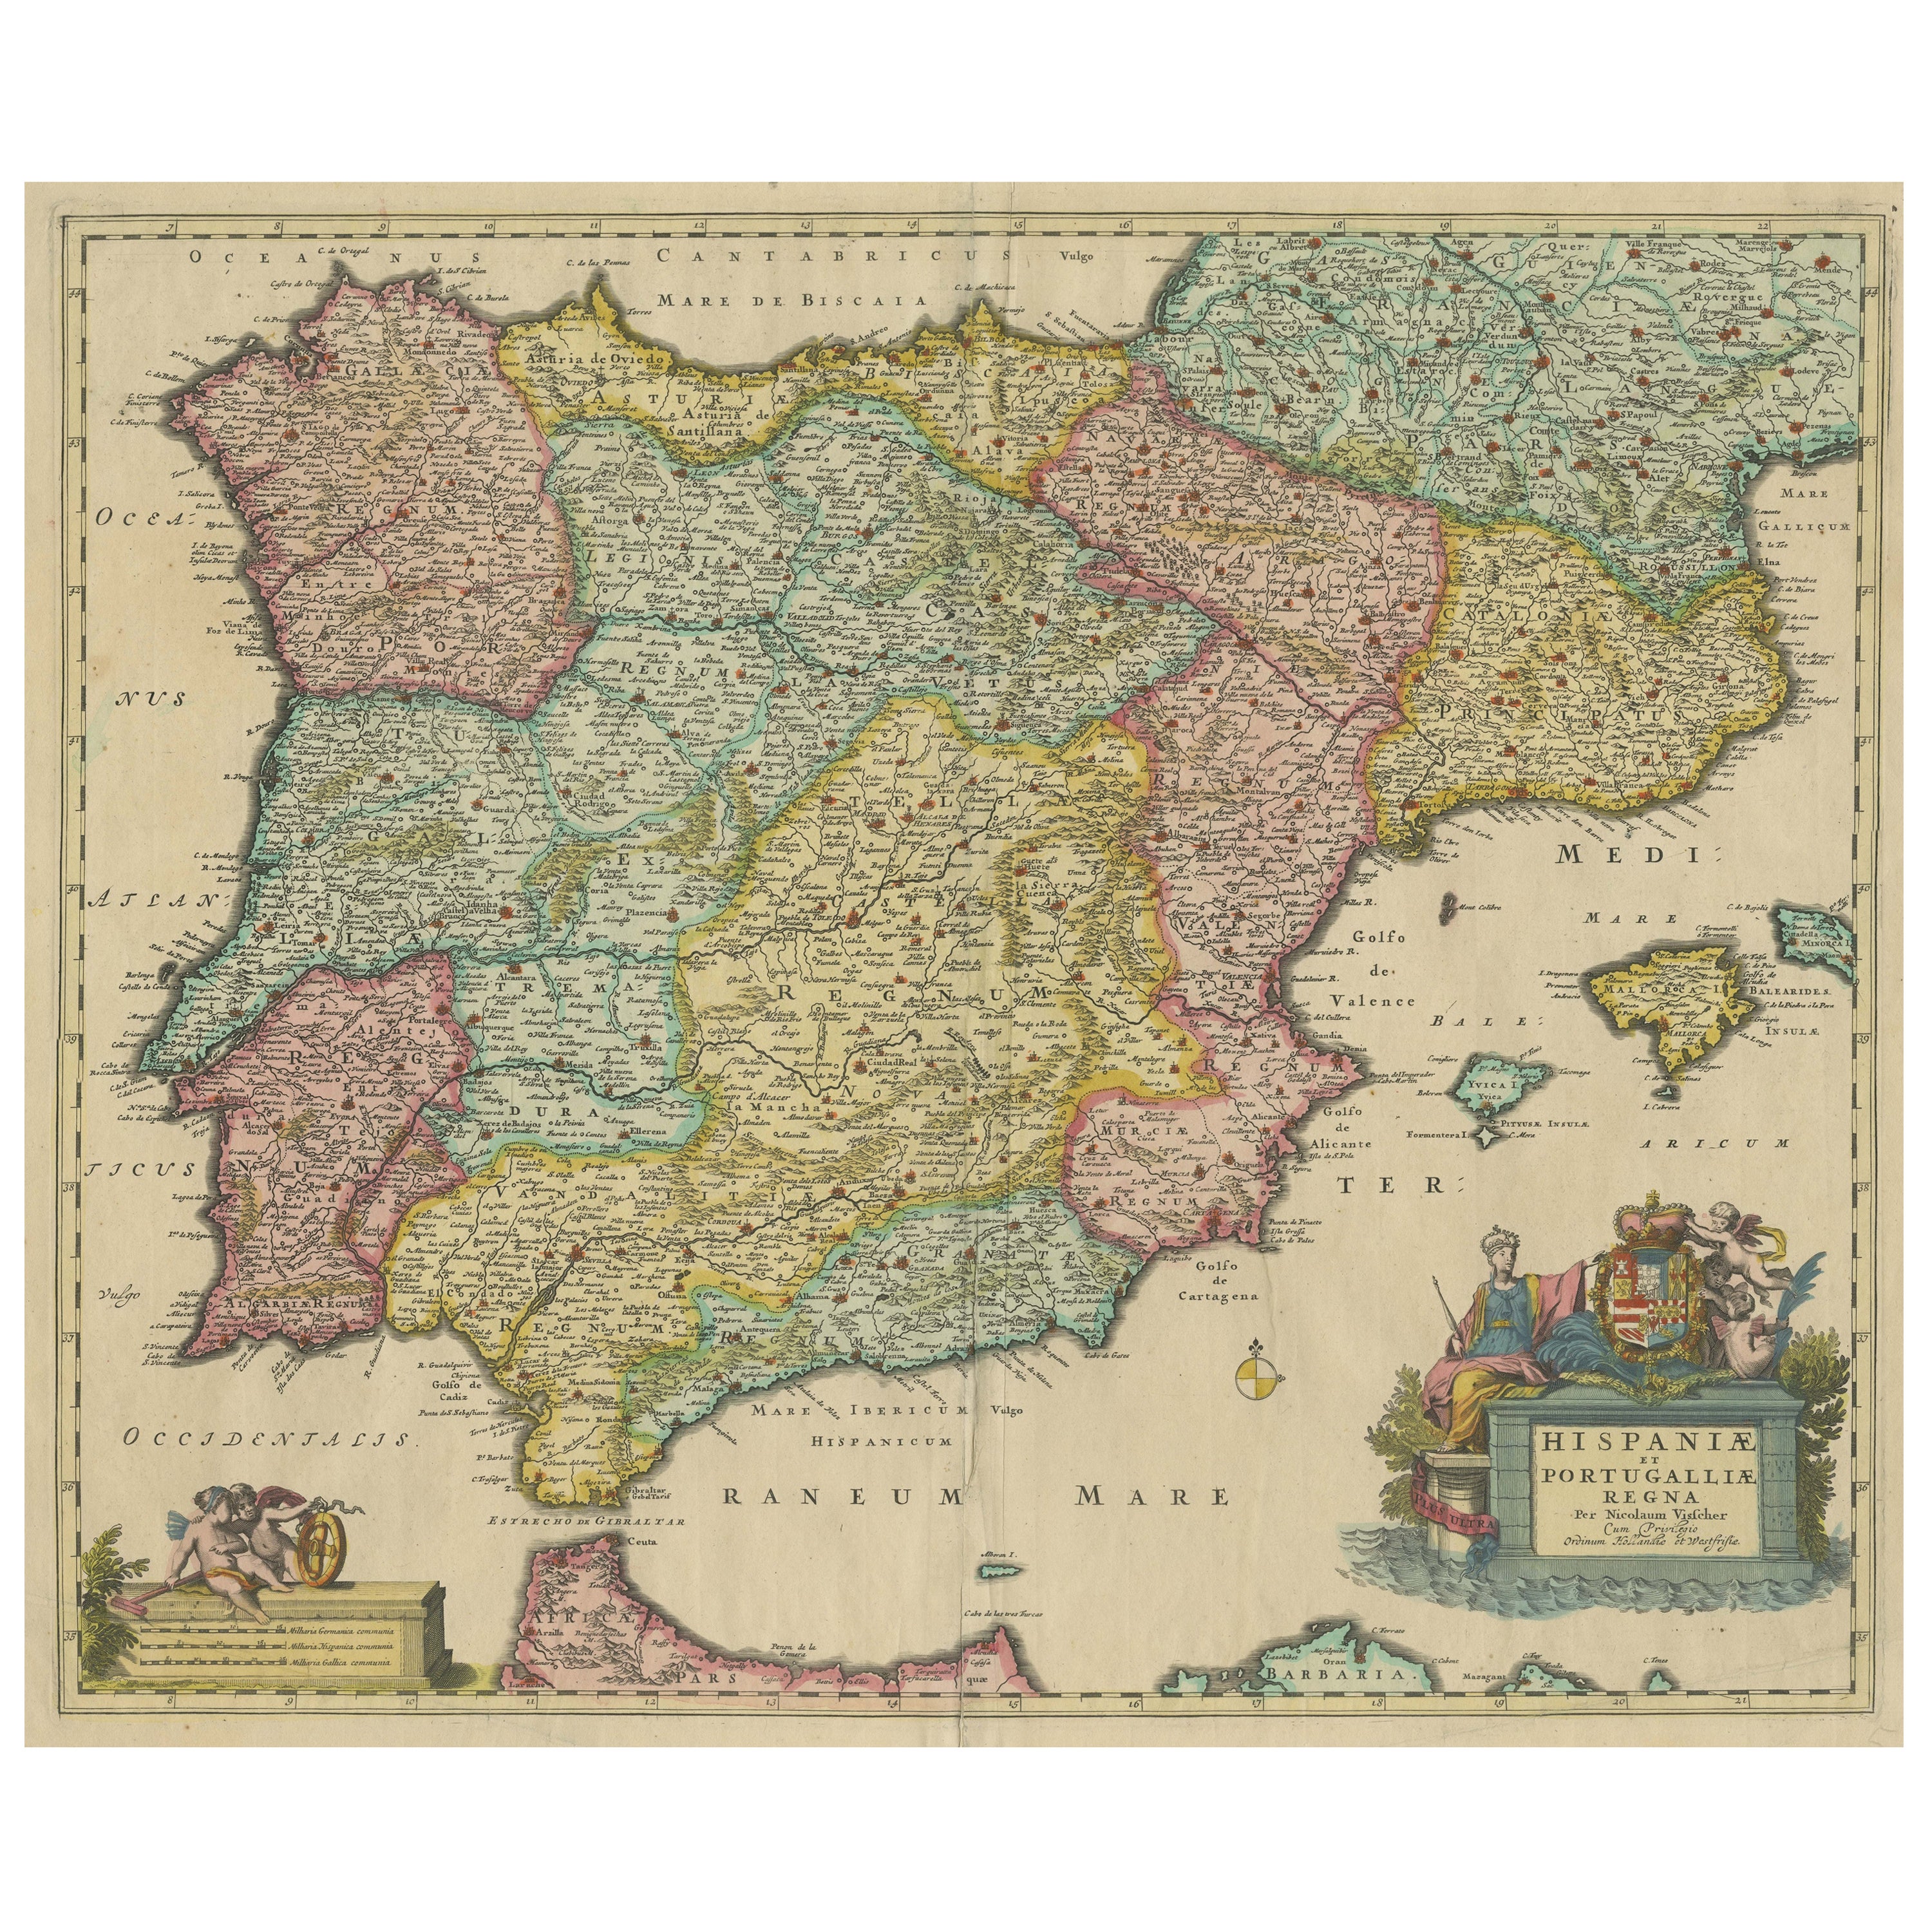 Antique Map of the Iberian Peninsula with two decorative Cartouches